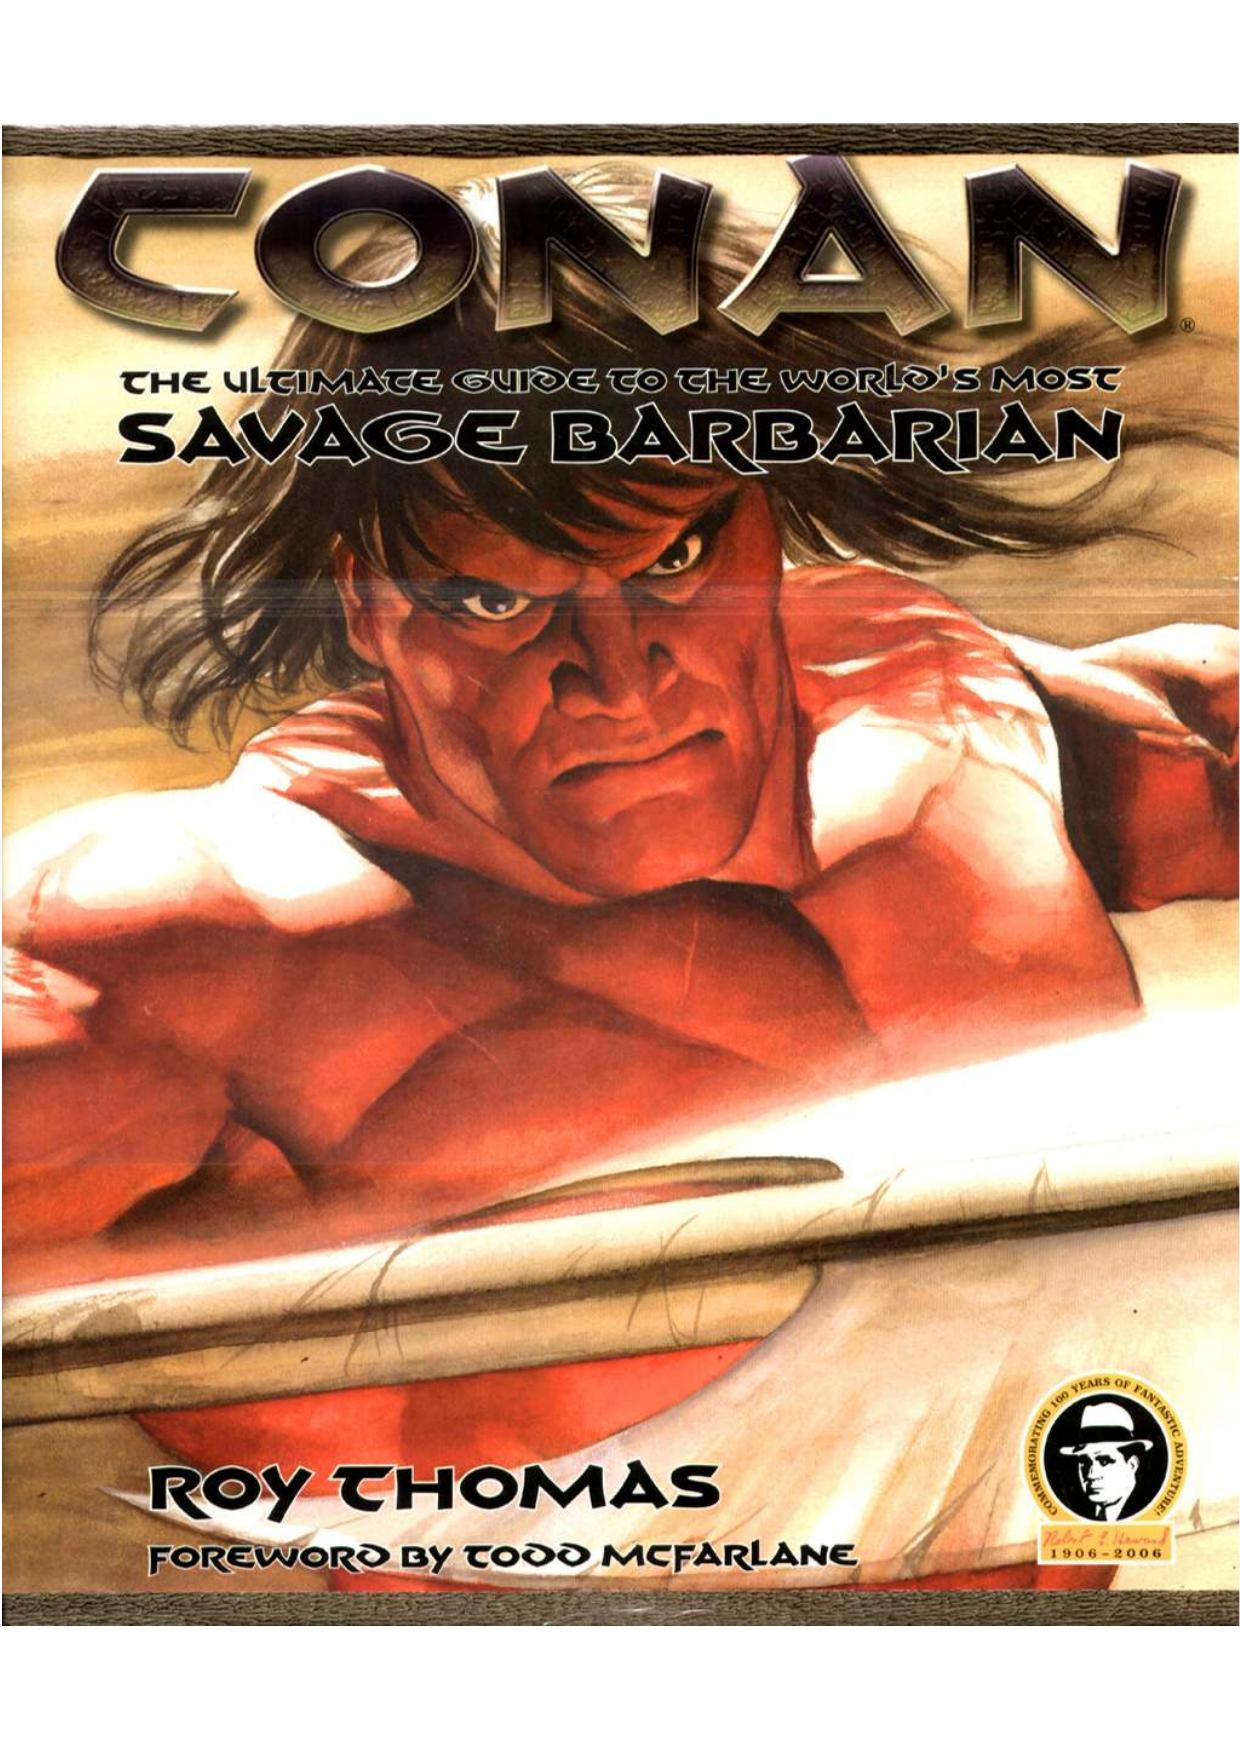 Conan The Ultimate Guide to the World's Most Savage Barbarian (DK)